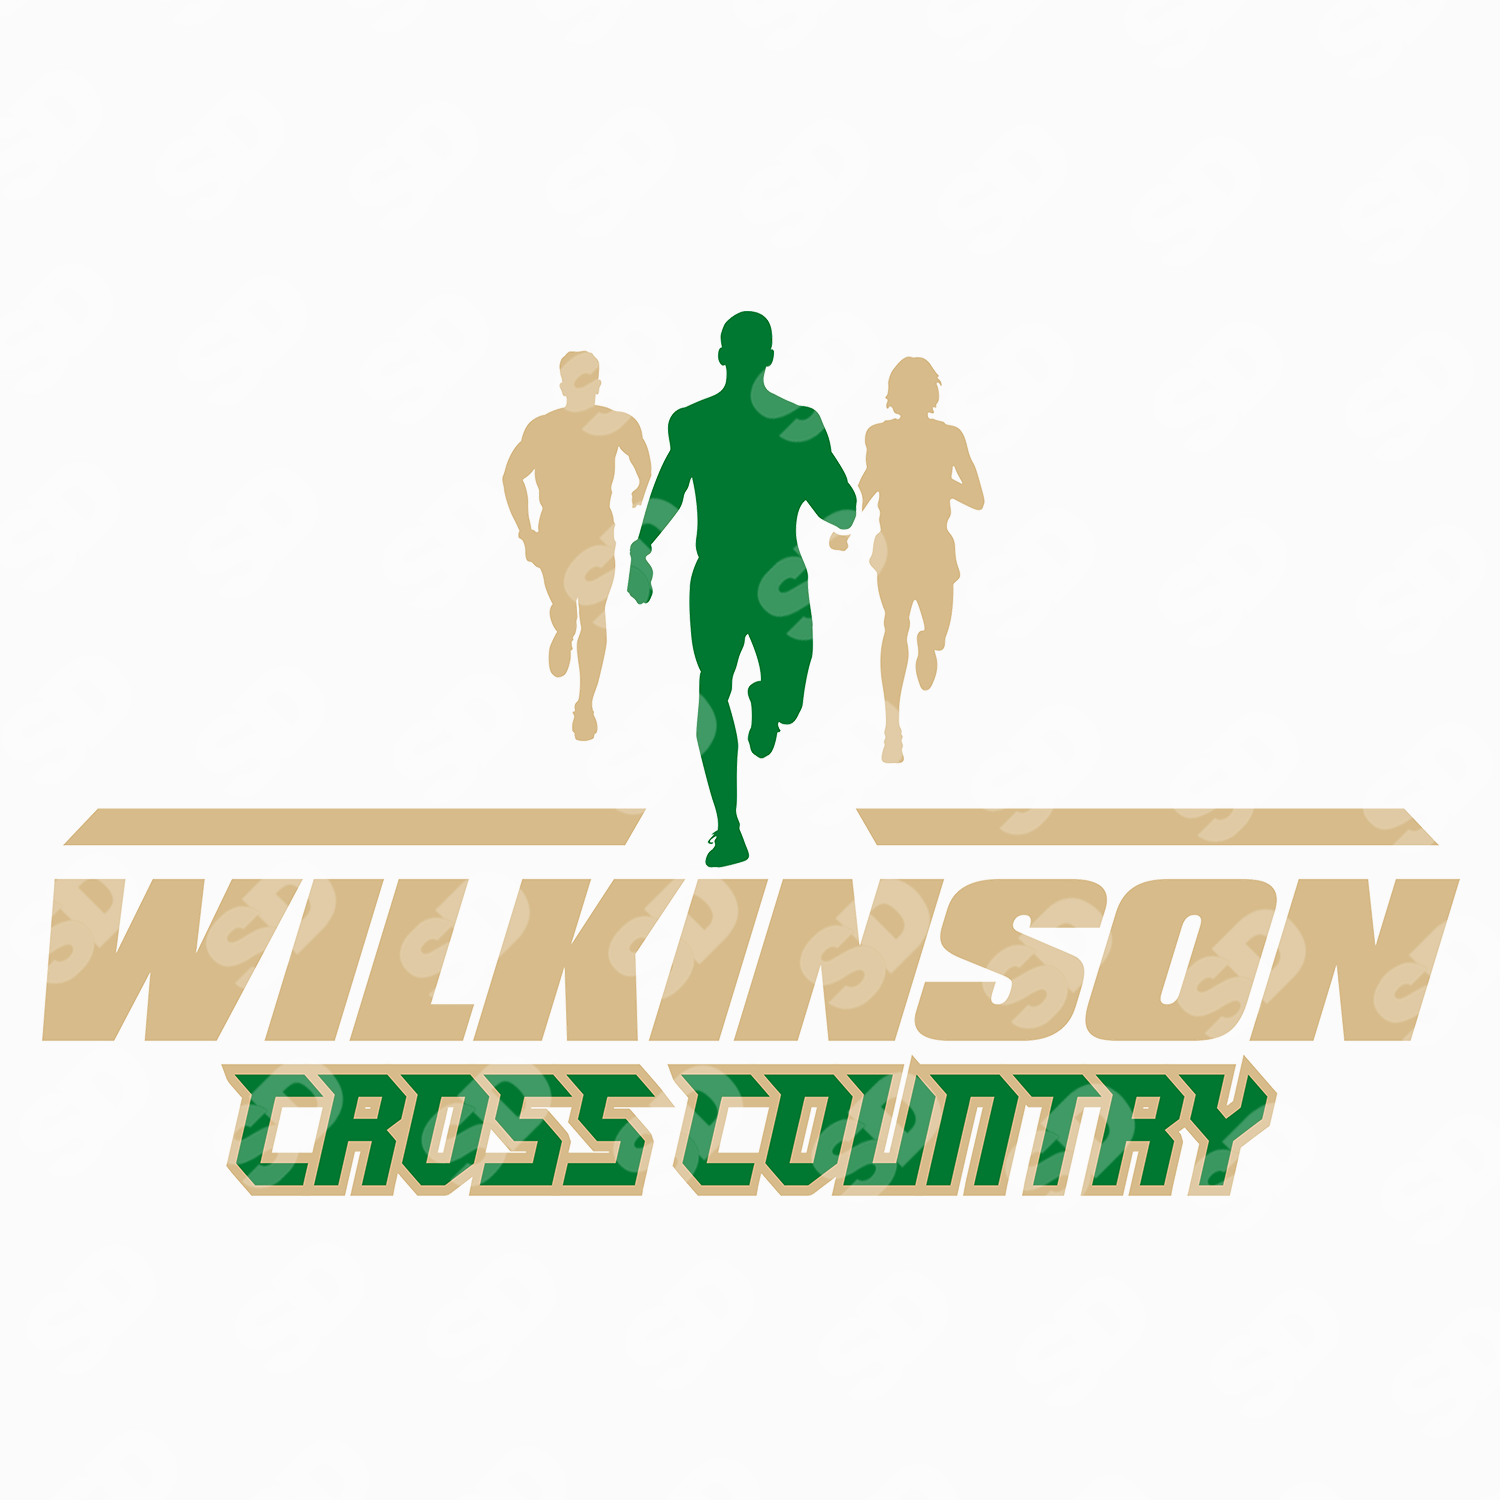 Cross Country Template Design (197560)